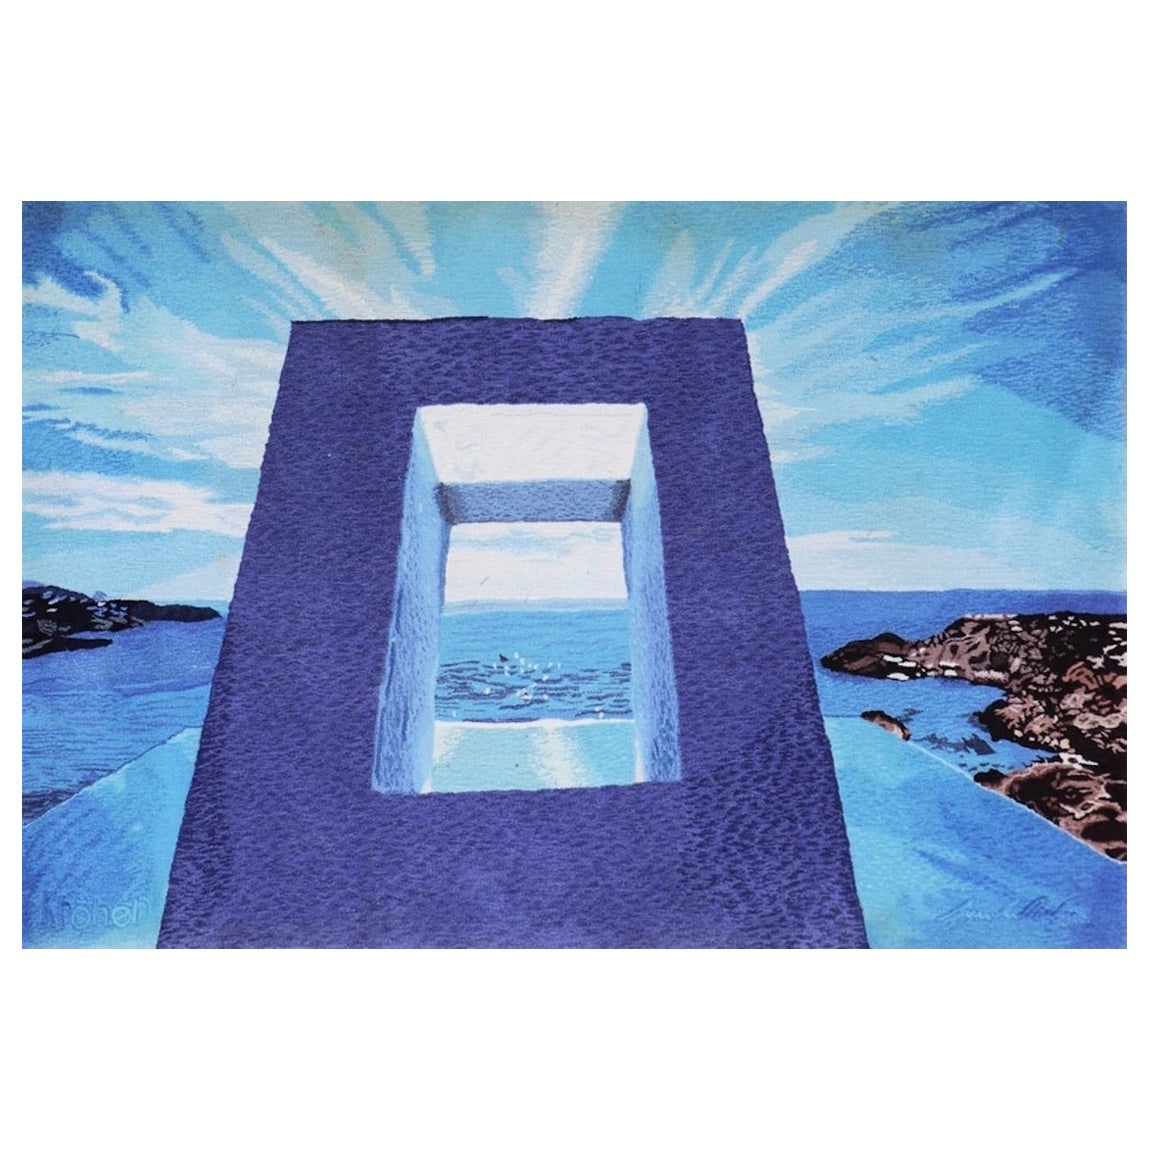 Ewald Kroner: a René Magritte-Style Doorway of a Seascape For Sale